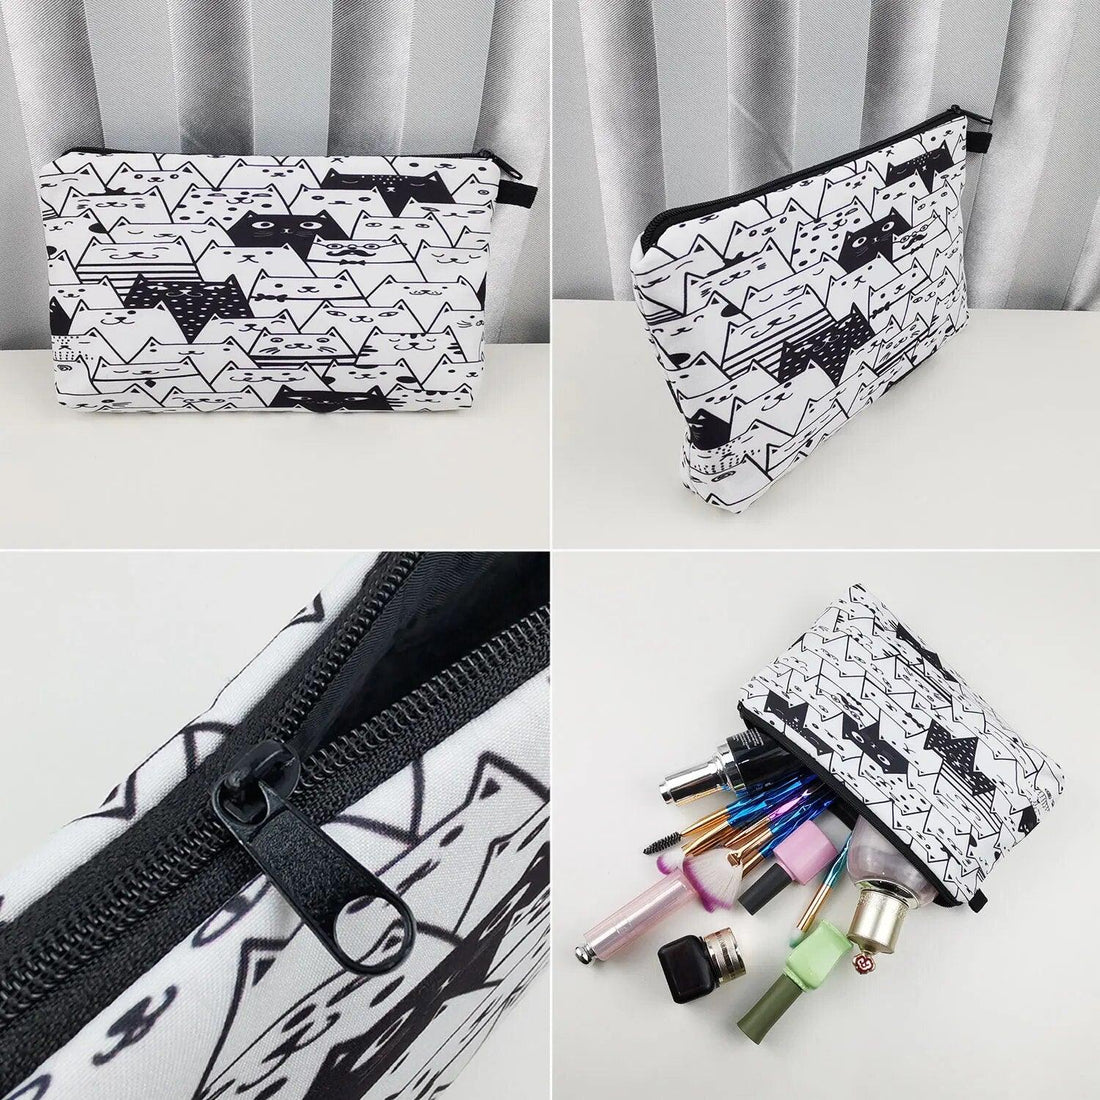 Various Coloful Cat Printed Travel Pouches/Cosmetic bag, 17 Designs - Just Cats - Gifts for Cat Lovers